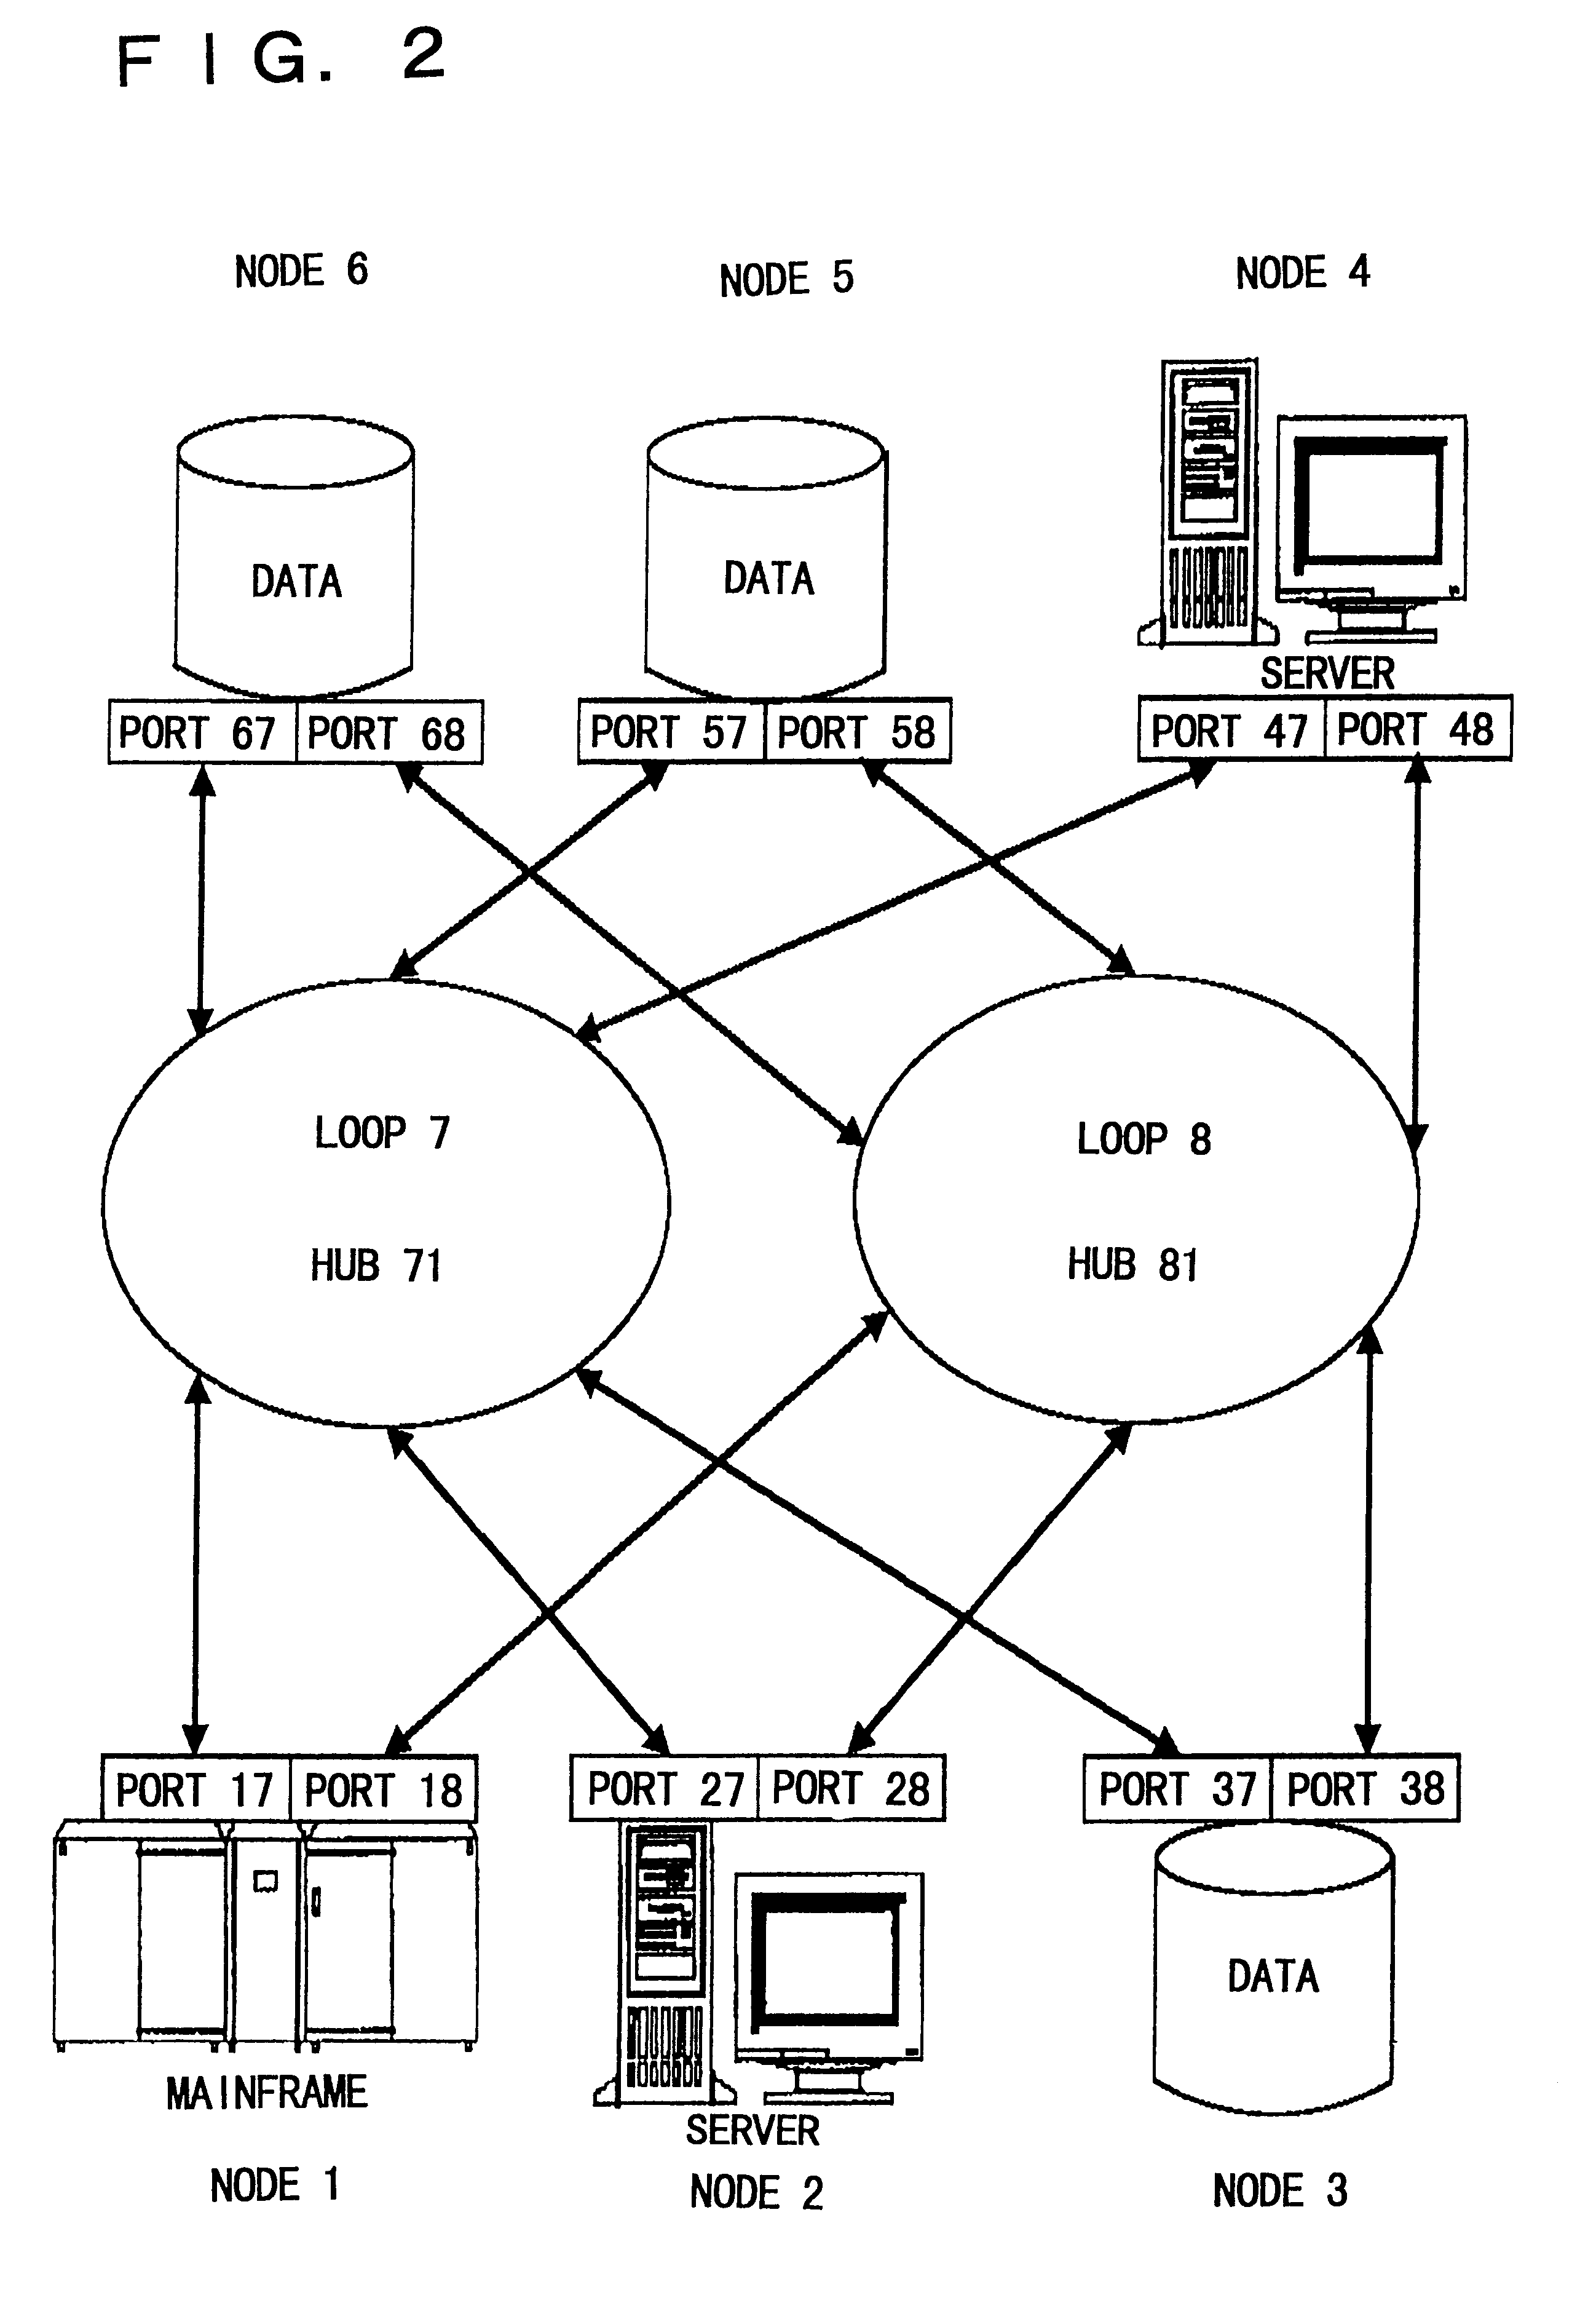 System and process for detecting/eliminating faulty port in fiber channel-arbitrated loop